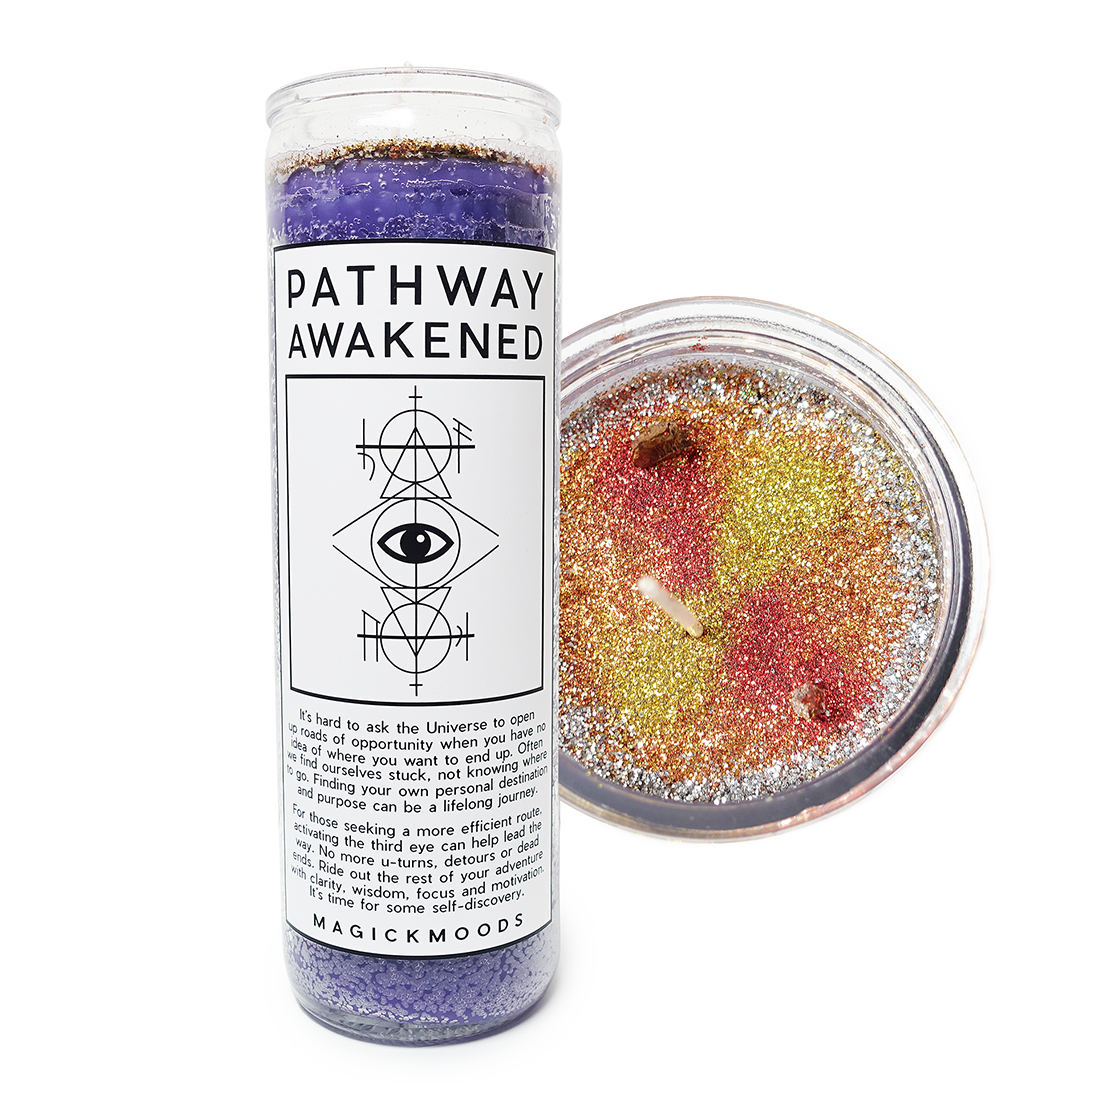 Pathway Awakened 7-Day Meditation Candle - PREORDER - Ships by July 28th, 2023